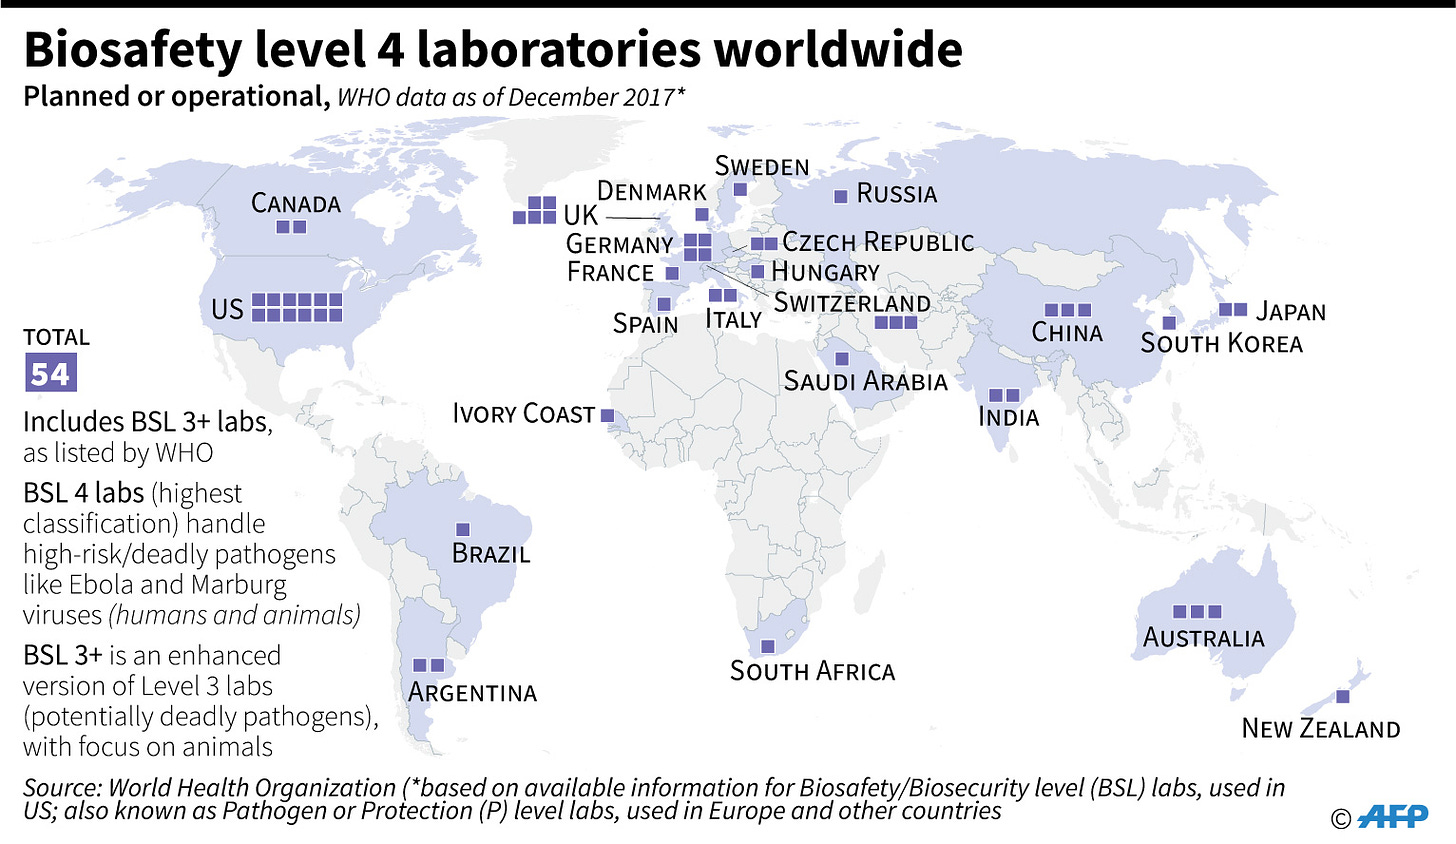 AFP News Agency on X: "Planned or operational biosafety level 4 laboratories  (Pathogen or Protection level labs), which handle high risk and deadly  pathogens, according to @WHO data @AFPgraphics https://t.co/EaIsFLQFIl" / X